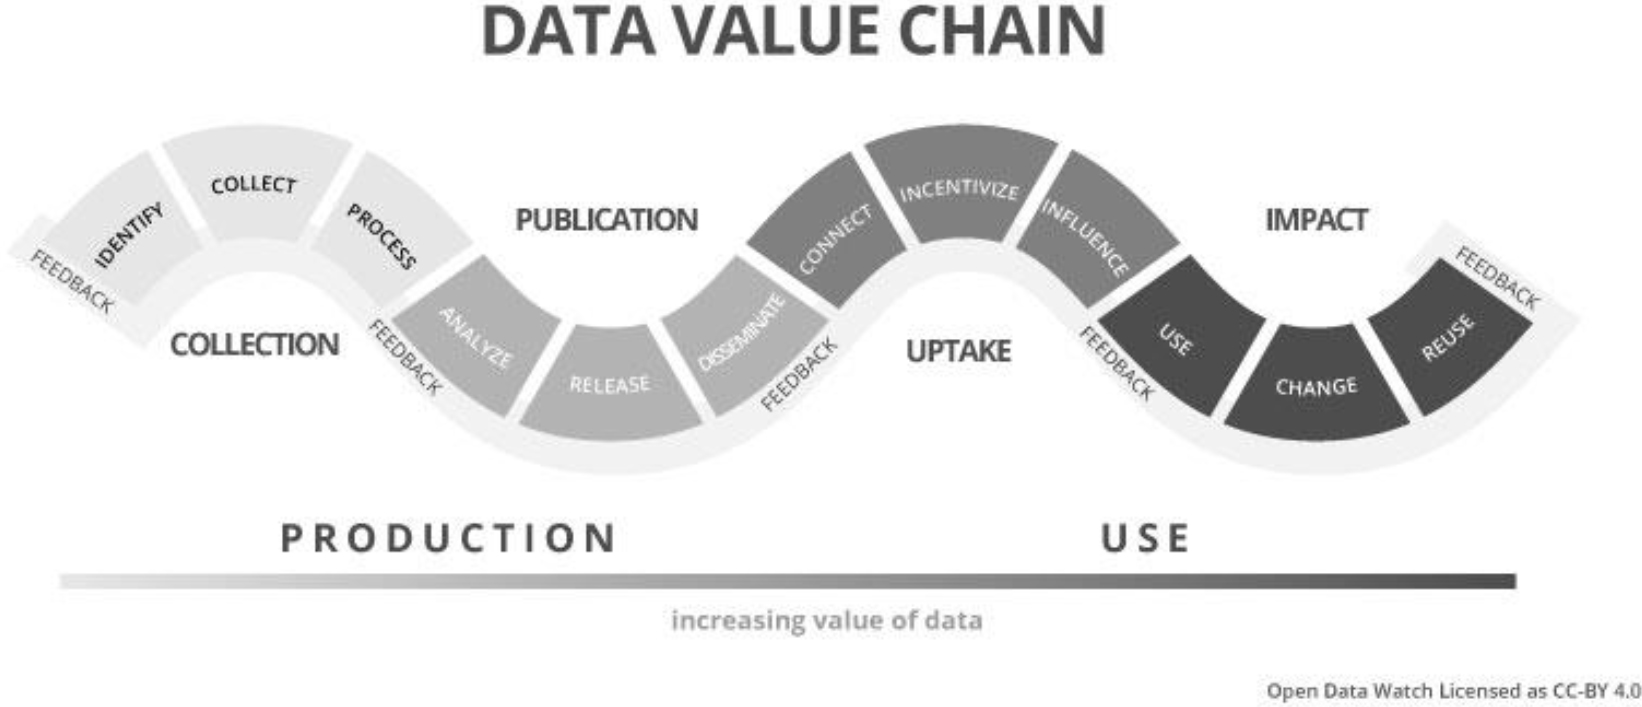 The data value chain.